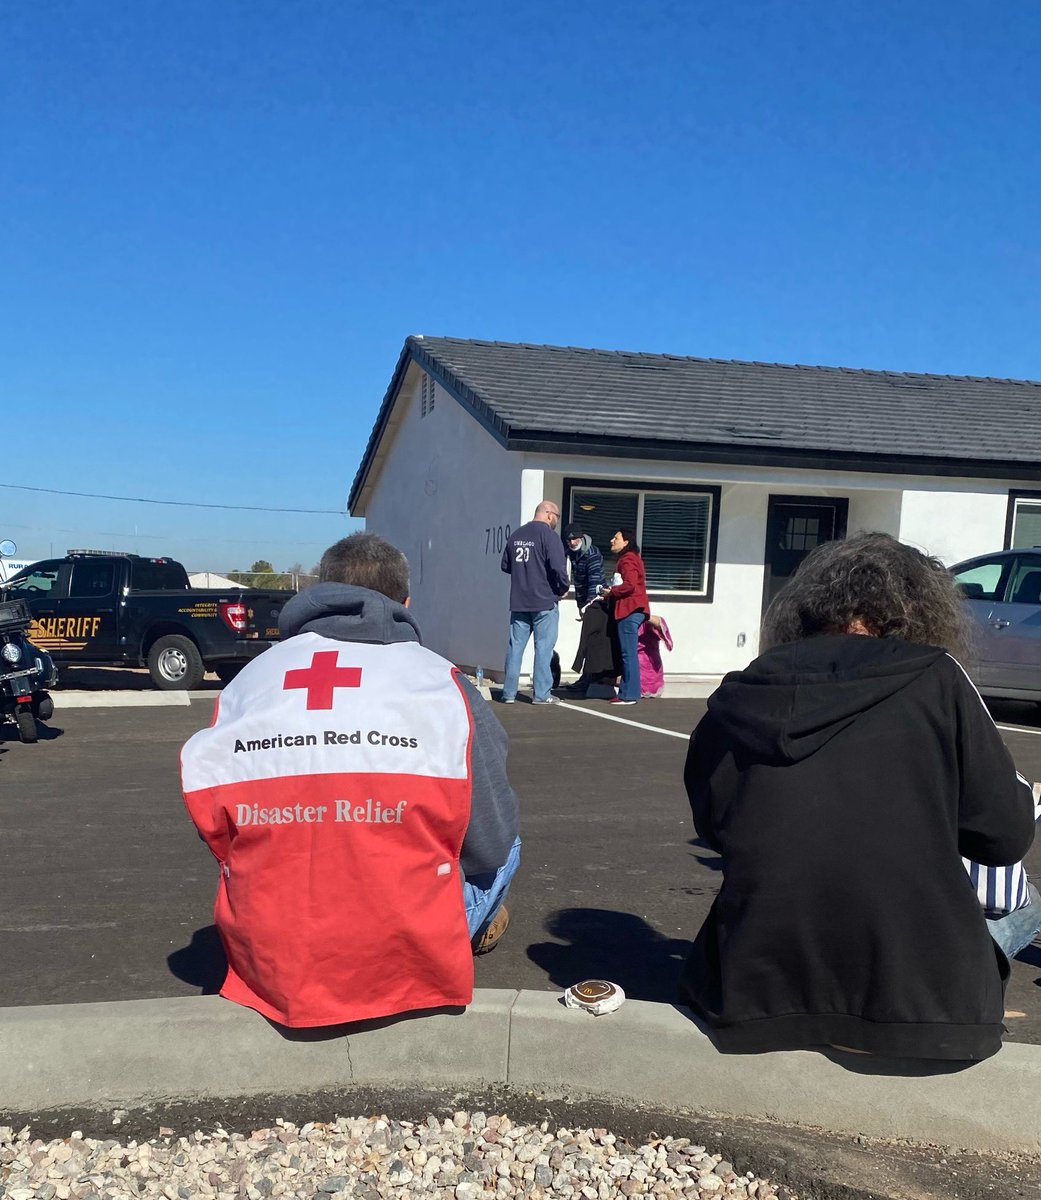 Our volunteers responded to a 14 unit apartment fire today in Glendale - we were able to provide immediate assistance to those affected. #redcrossreadyaz #arizona